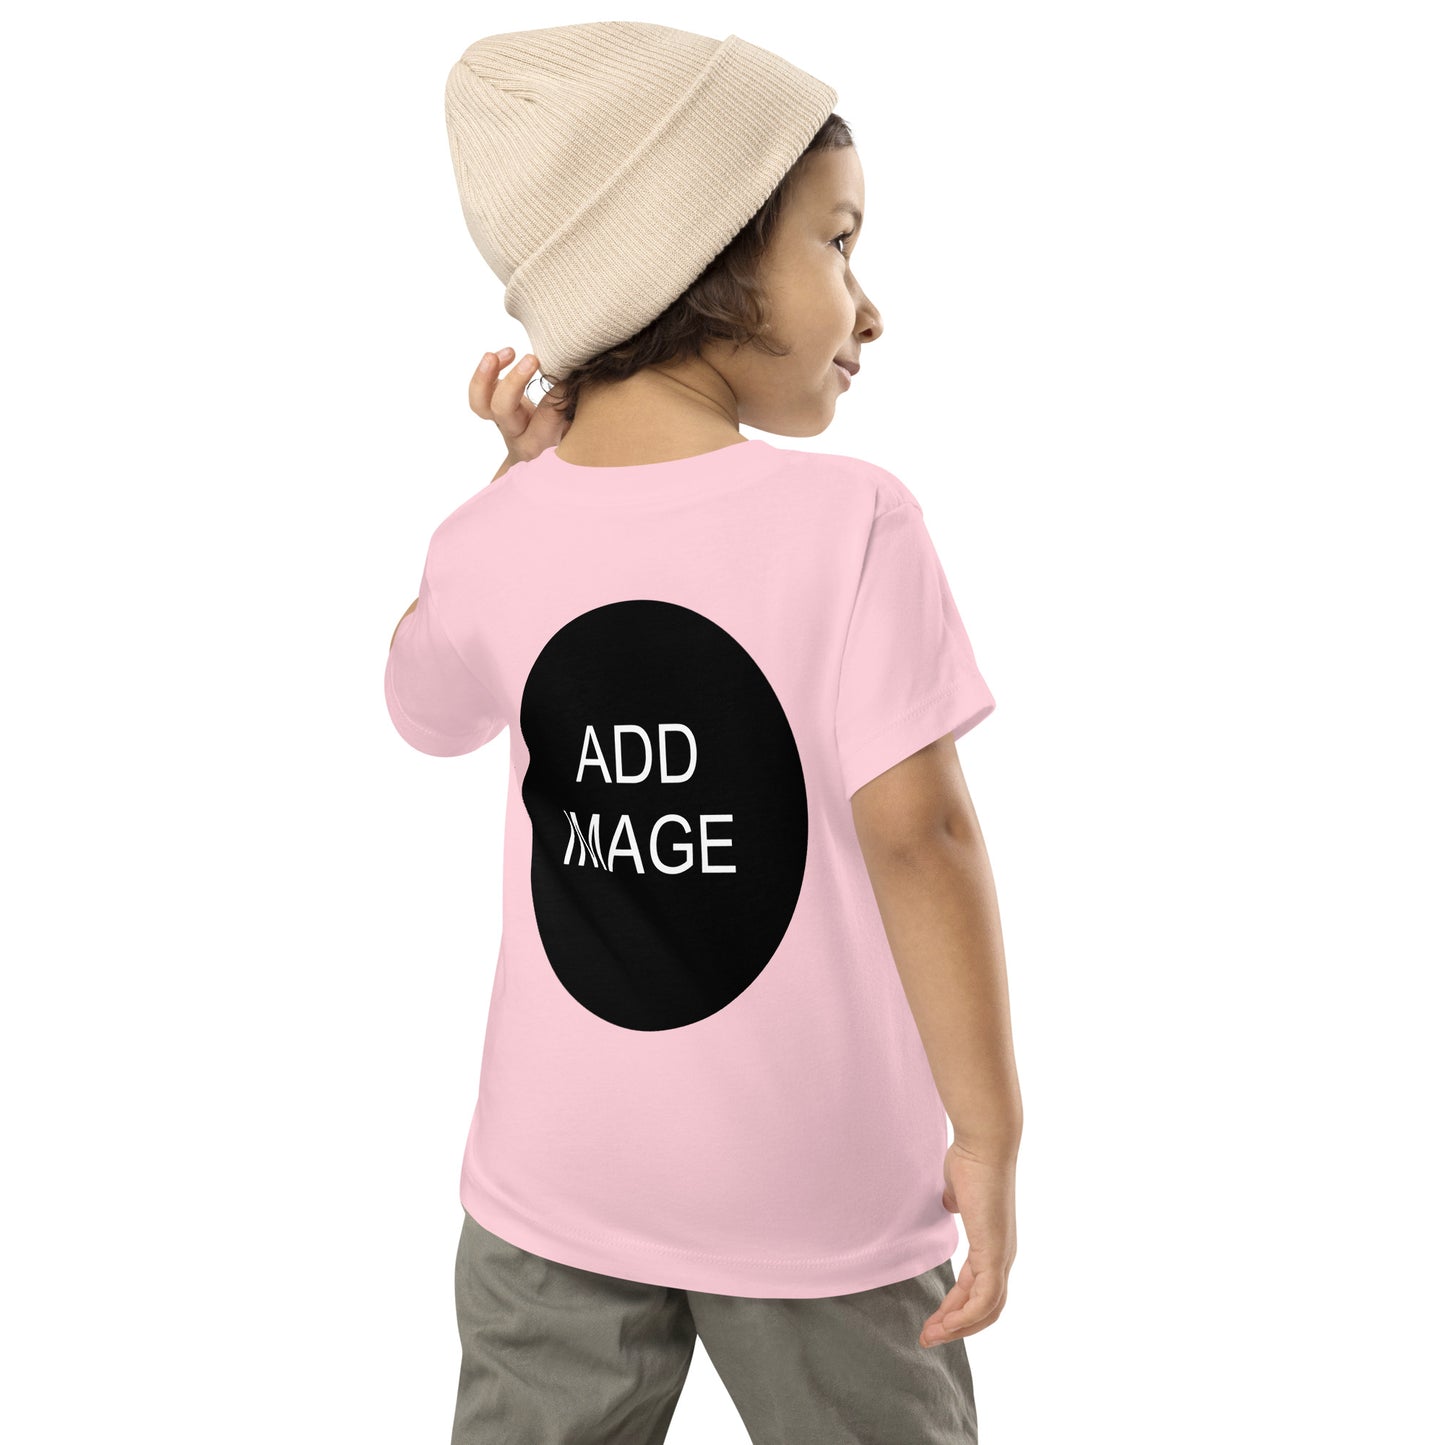 Toddler Short Sleeve Tee 2T-5T (front & back image)